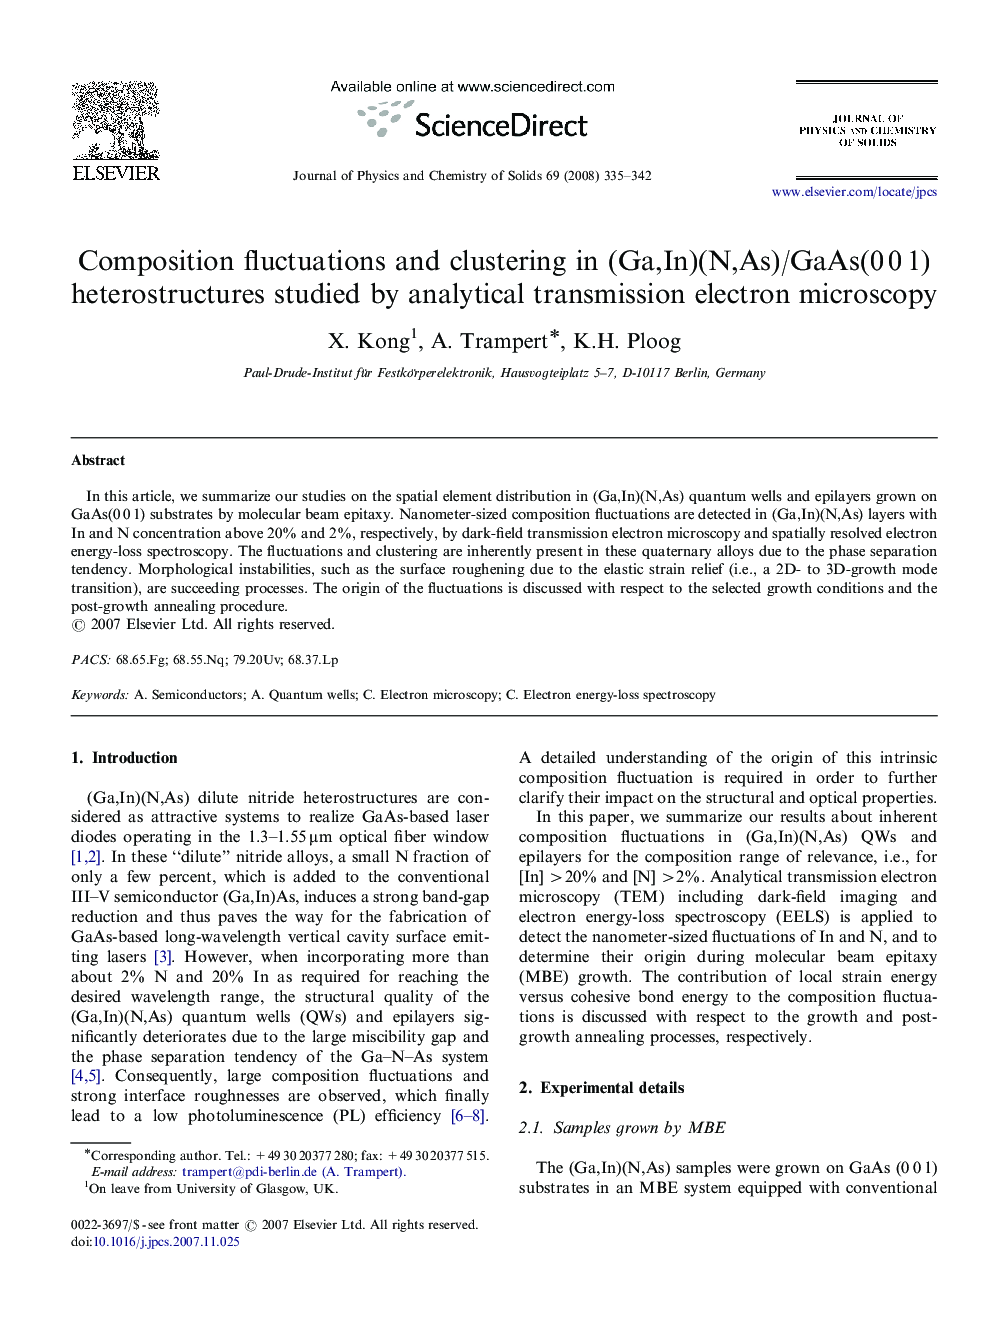 Composition fluctuations and clustering in (Ga,In)(N,As)/GaAs(0Â 0Â 1) heterostructures studied by analytical transmission electron microscopy